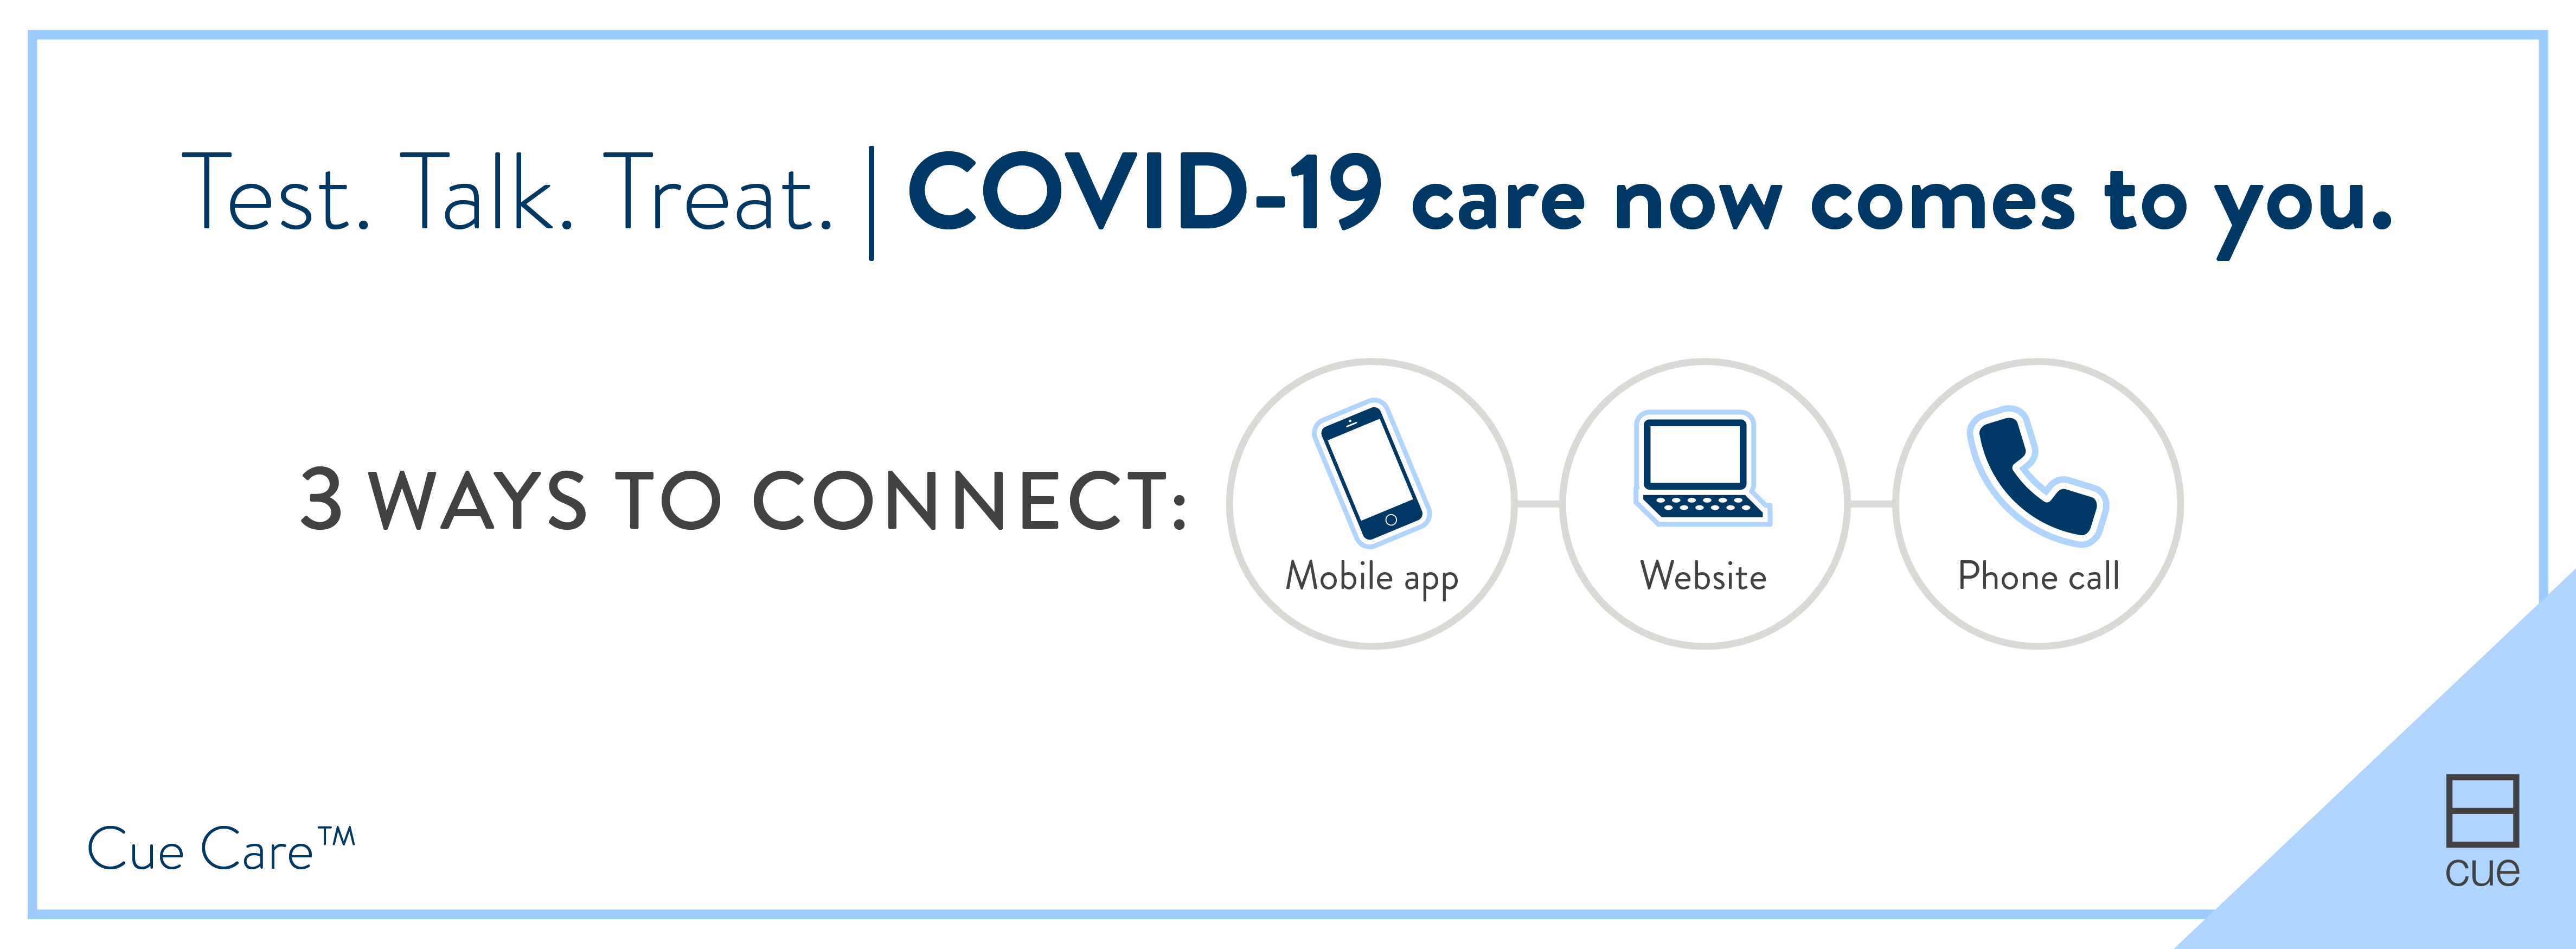 Test. Talk. Treat. COVID-19 care now comes to you. 3 ways to connect, mobile app, website, phone call.